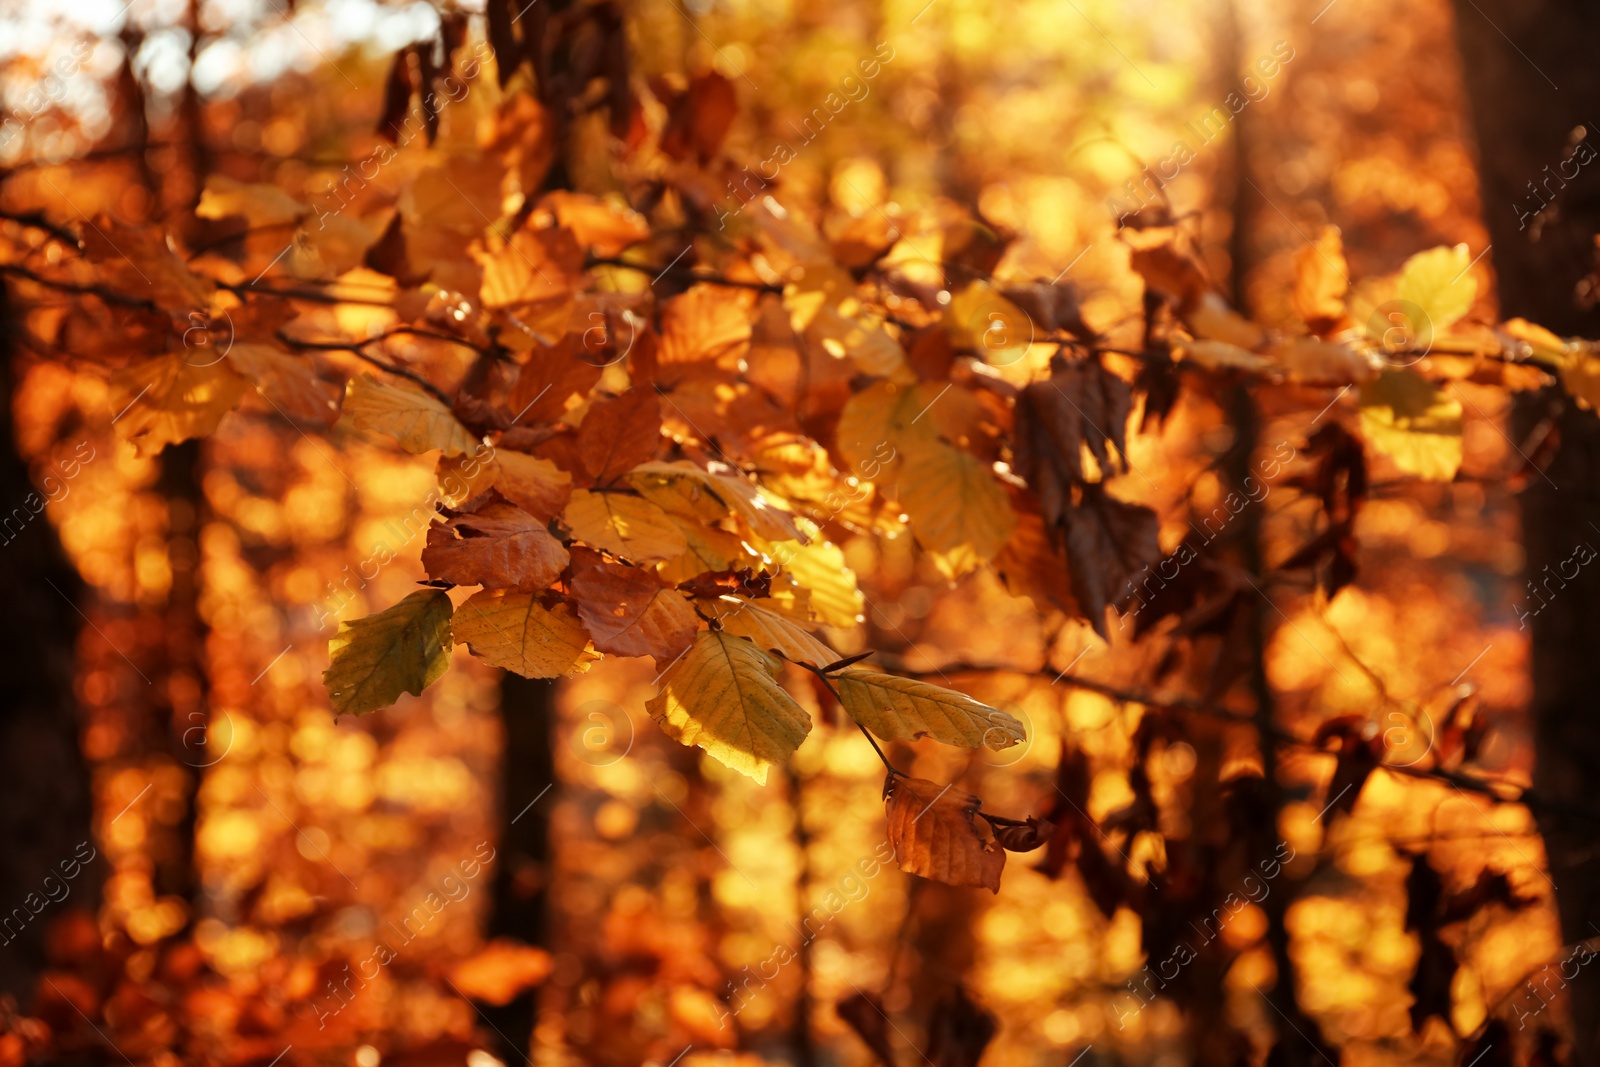 Photo of Sunlit golden leaves in autumn forest. Seasonal background